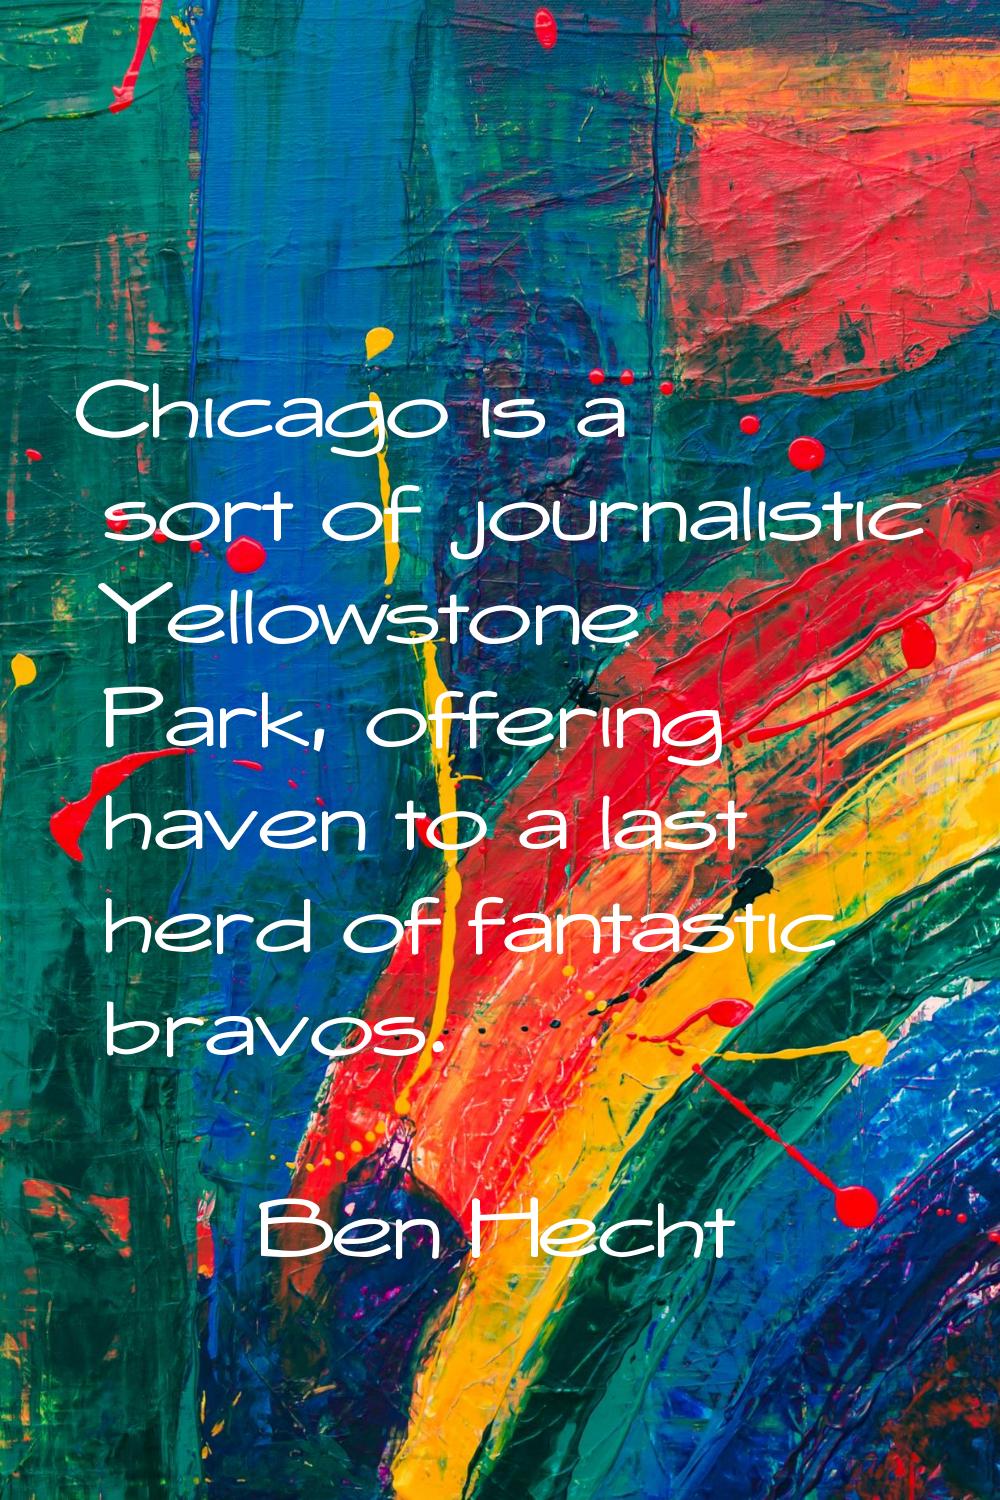 Chicago is a sort of journalistic Yellowstone Park, offering haven to a last herd of fantastic brav